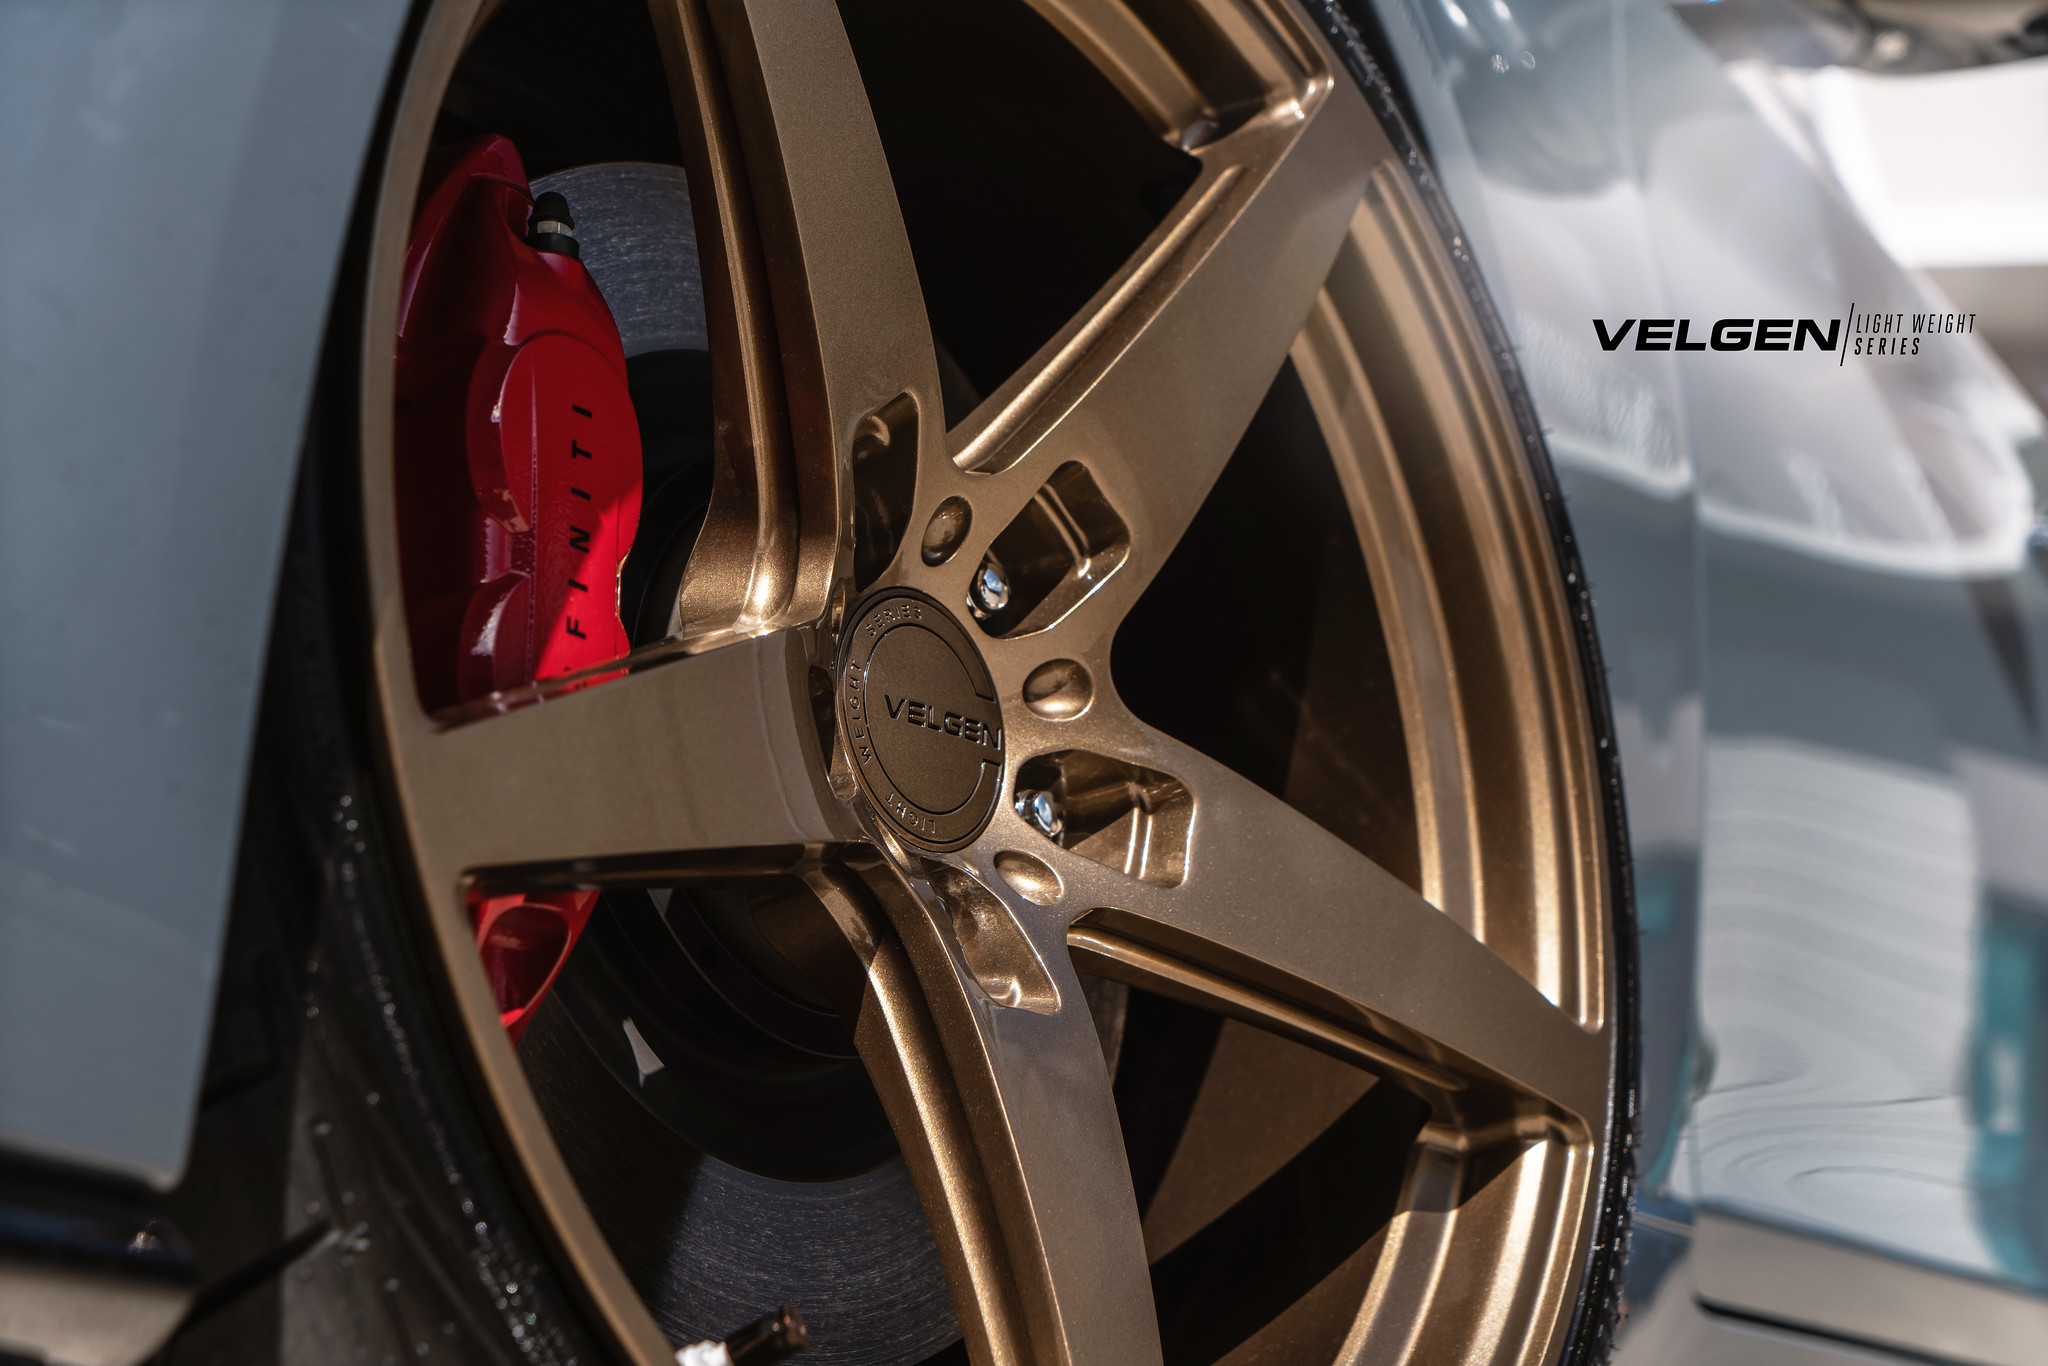 S650 Mustang Velgen wheels for your S650 Mustang | Vibe Motorsports 52033335332_f4b059a3a8_k